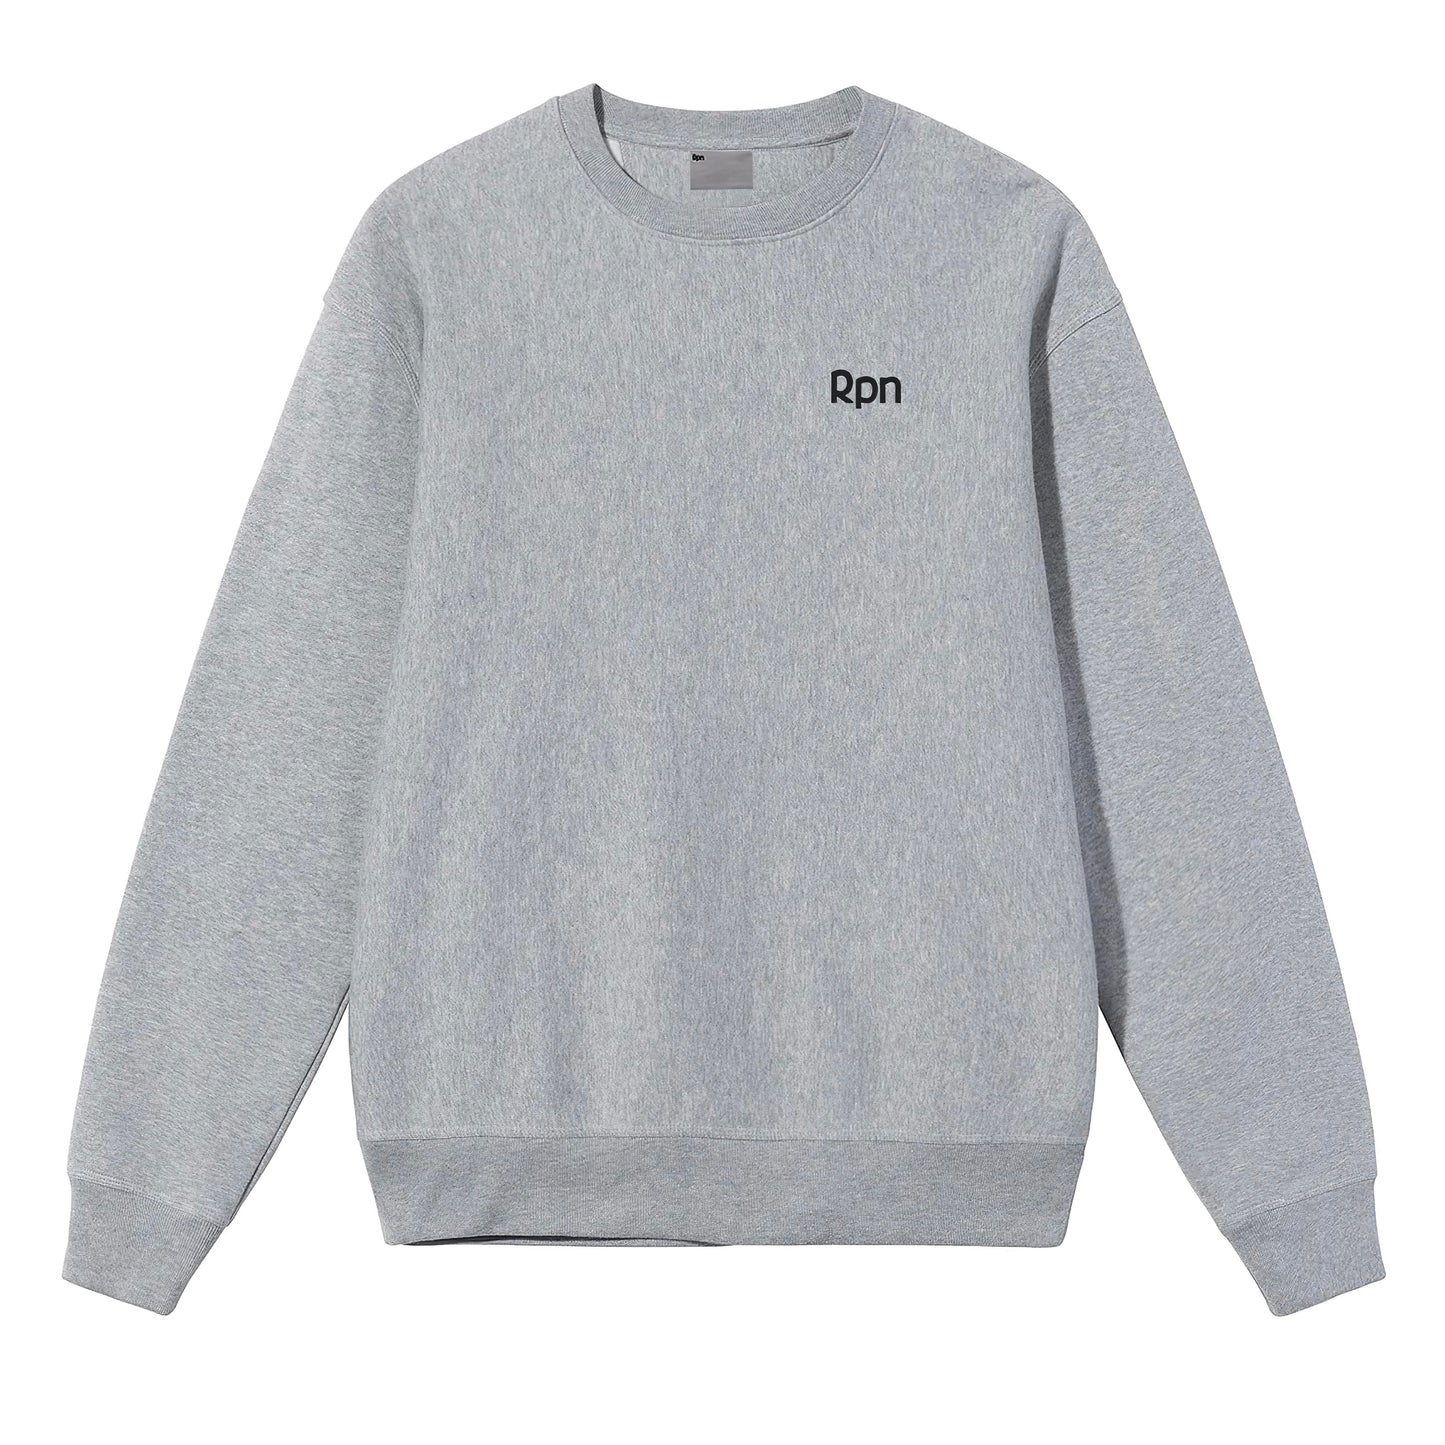 sweatshirt in grey with CWI1-S print